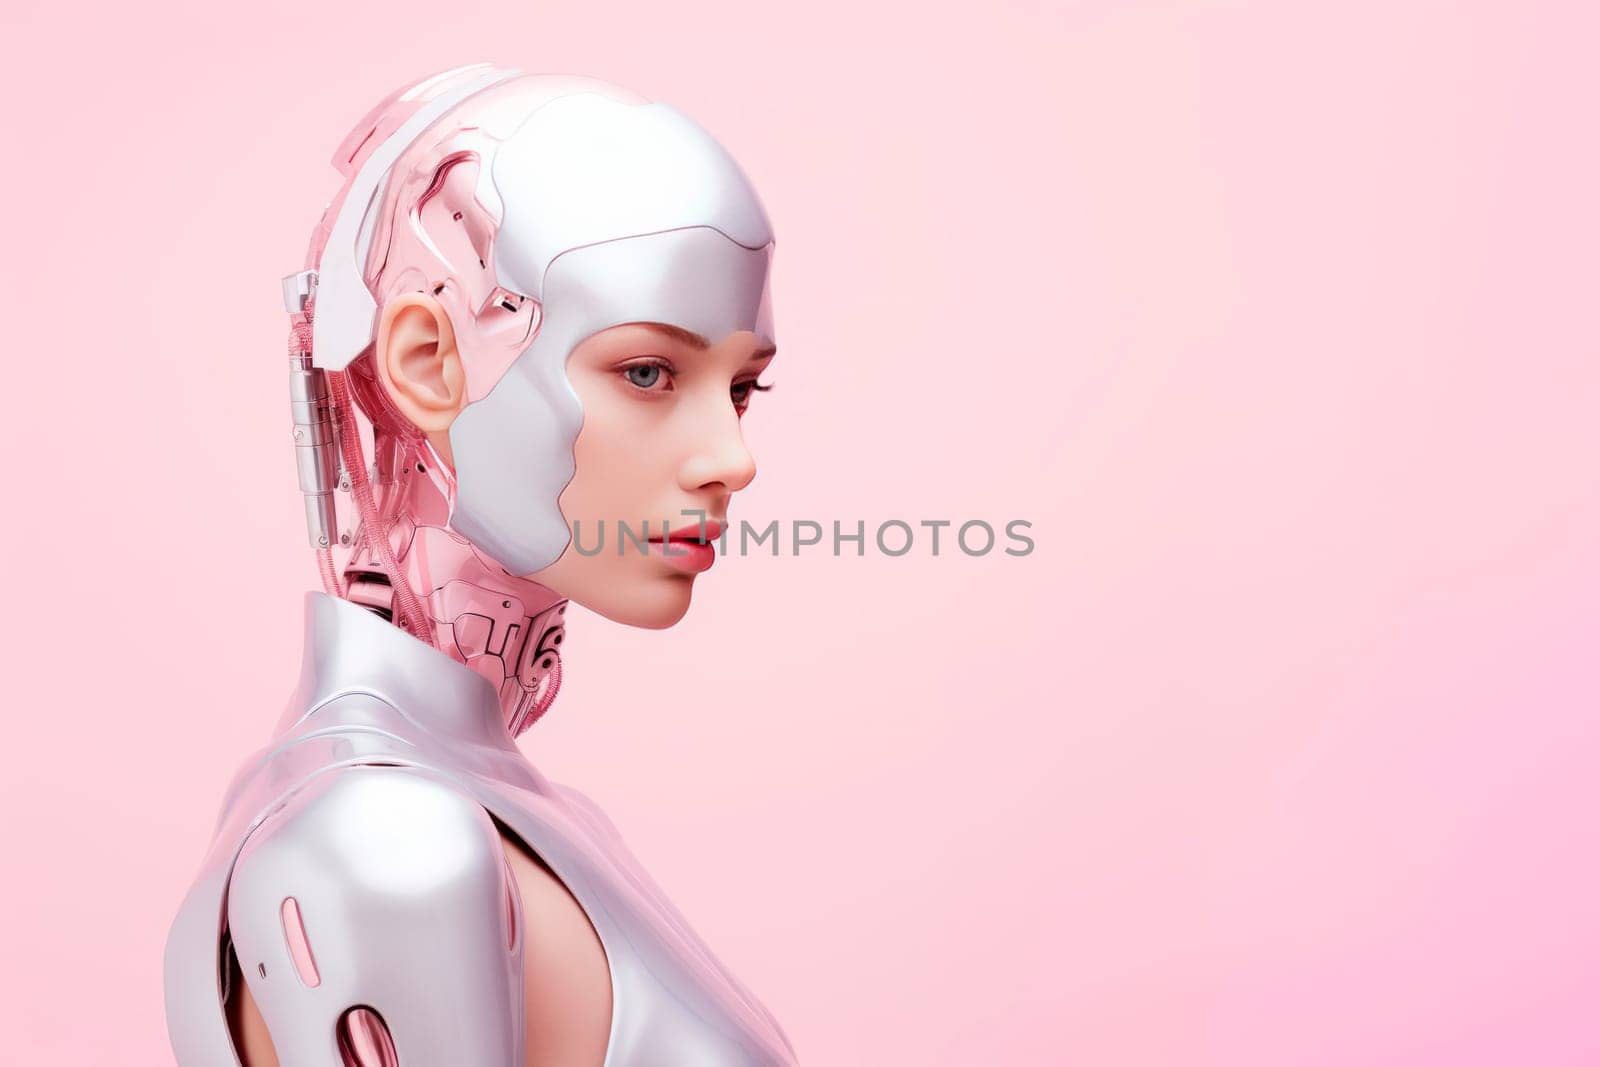 A humanoid female robot on a bright background. Minimalism. Future. High quality photo